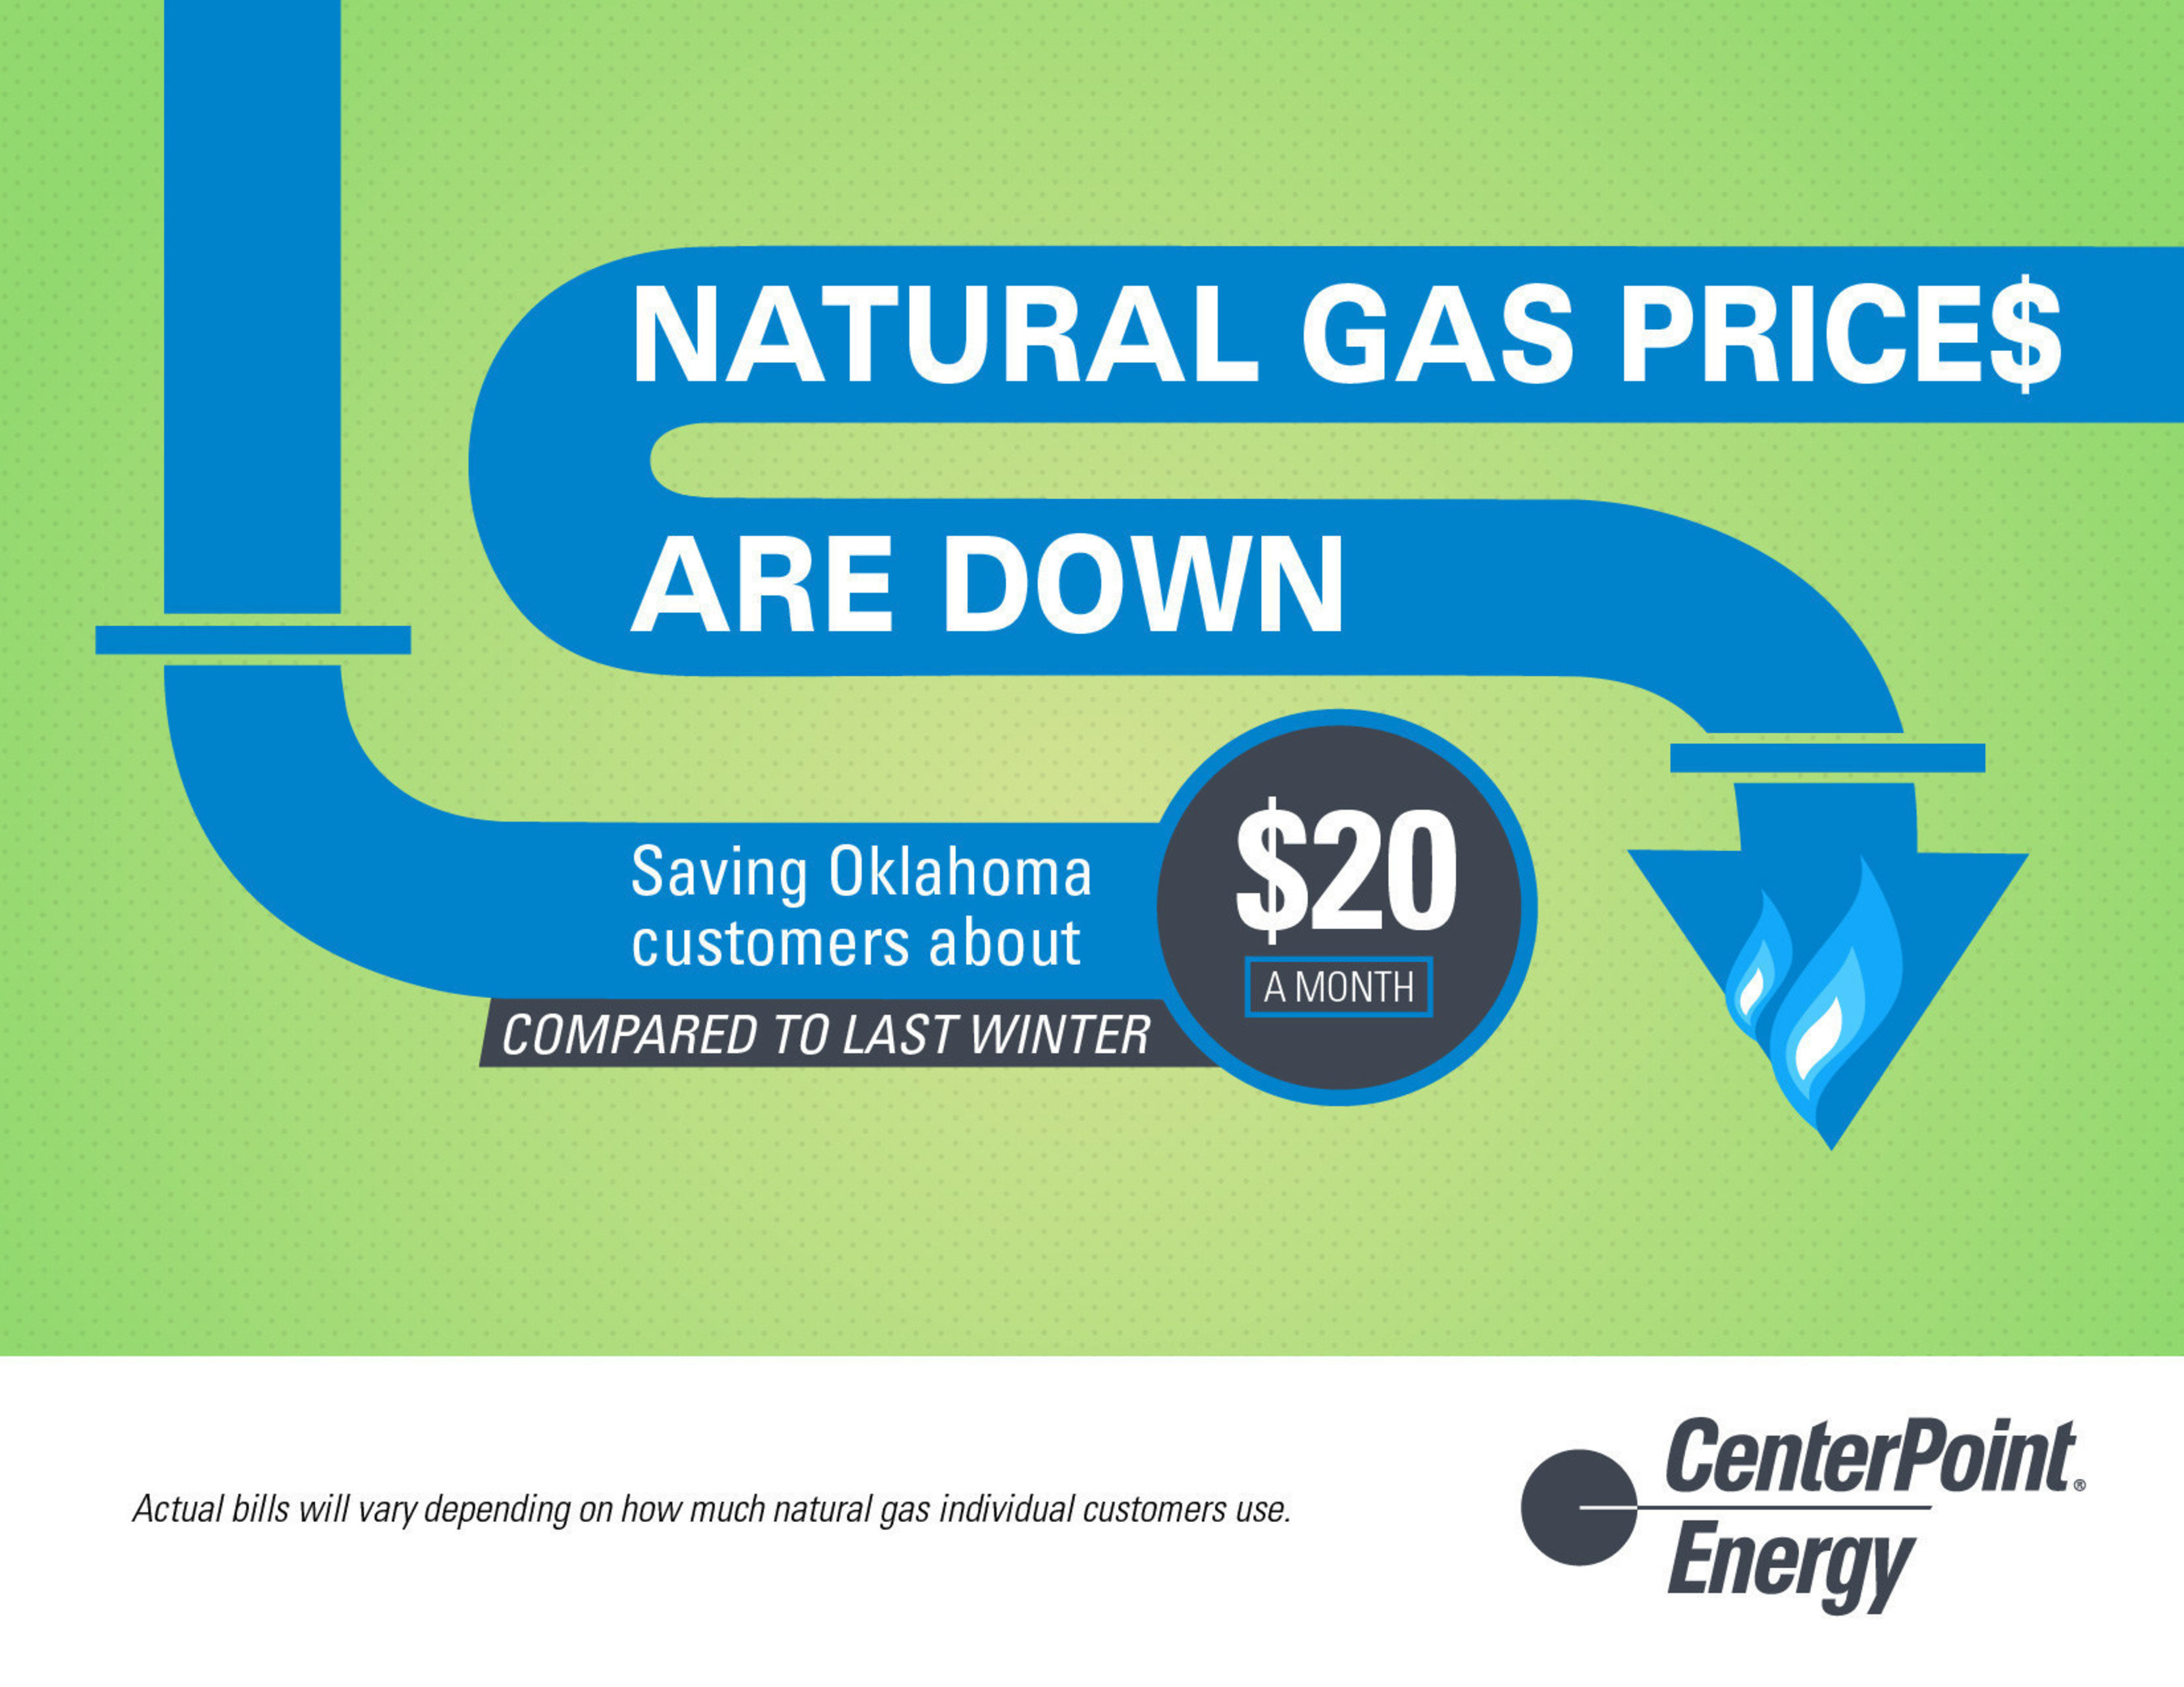 Falling natural gas prices mean 22 lower gas bills for CenterPoint